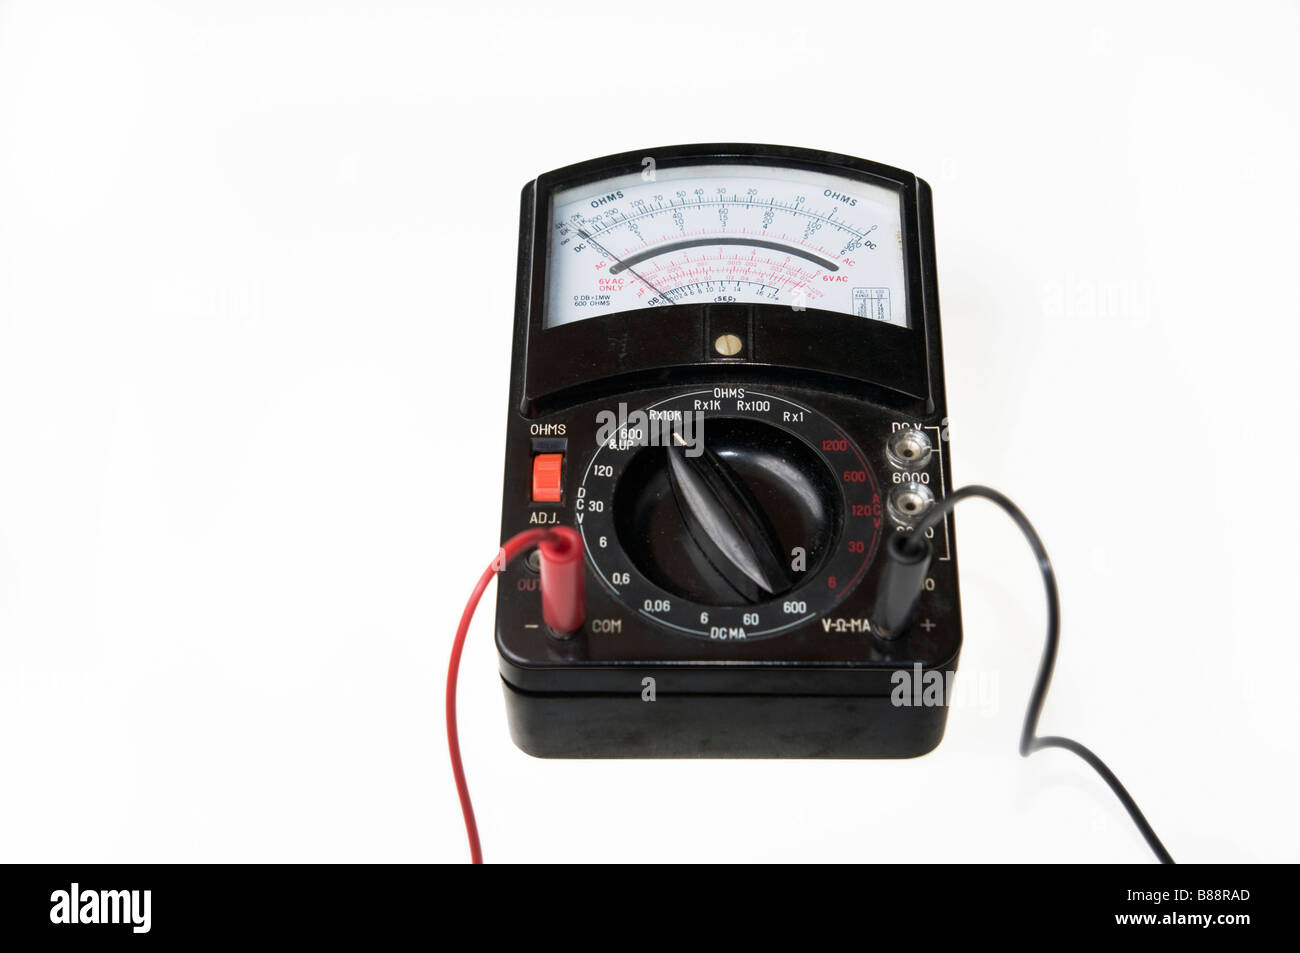 Analog Multimeter High Resolution Stock Photography and Images - Alamy